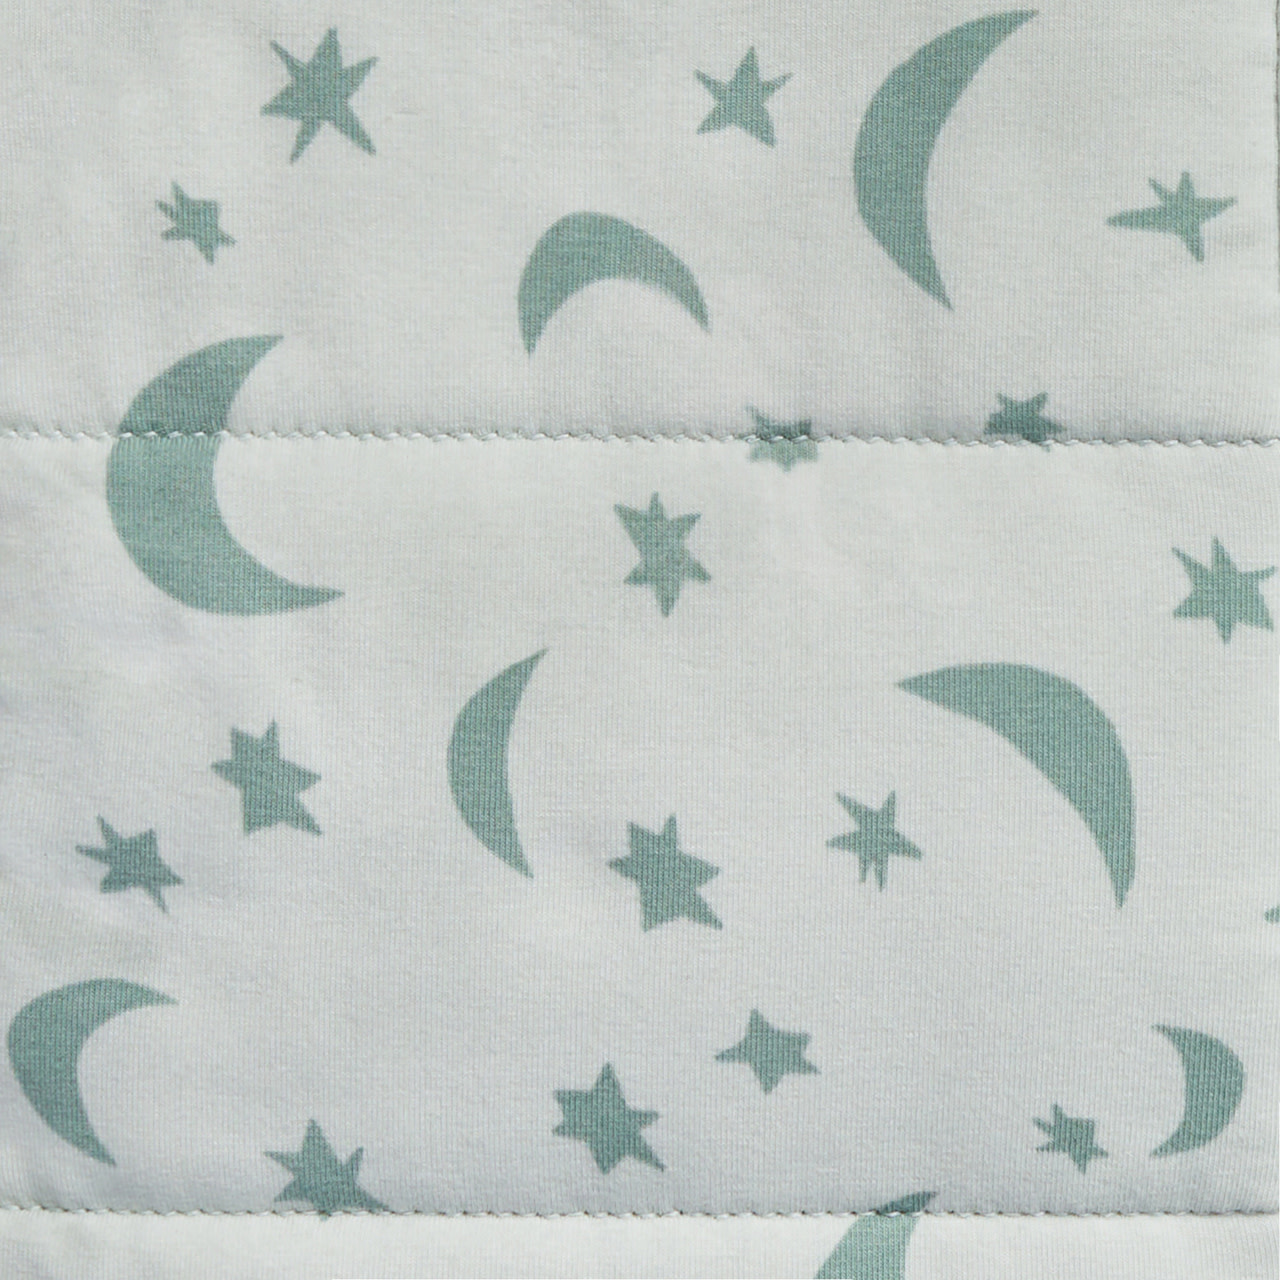 Love To Dream Love To Dream Swaddle UP™ Extra Warm 3.5 Tog - Olive - Moonlight